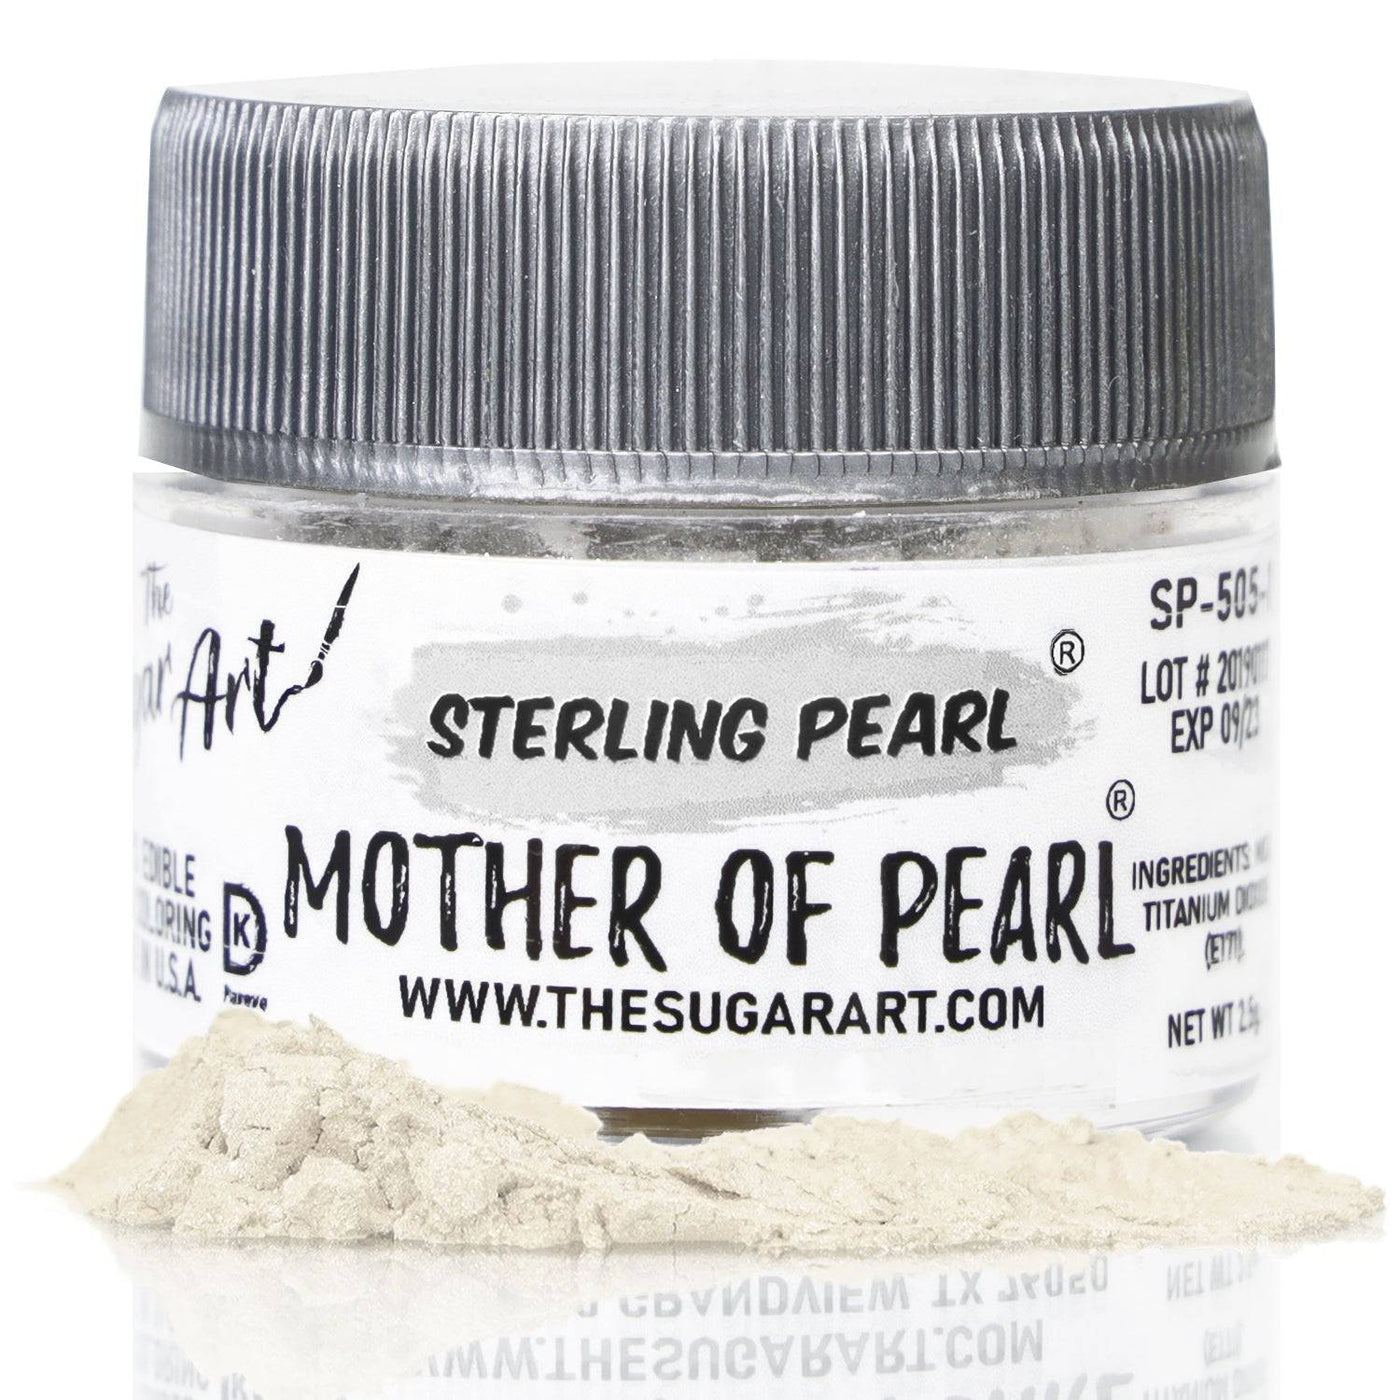 Mother of Pearl Luster Dust - The Sugar Art, Inc.